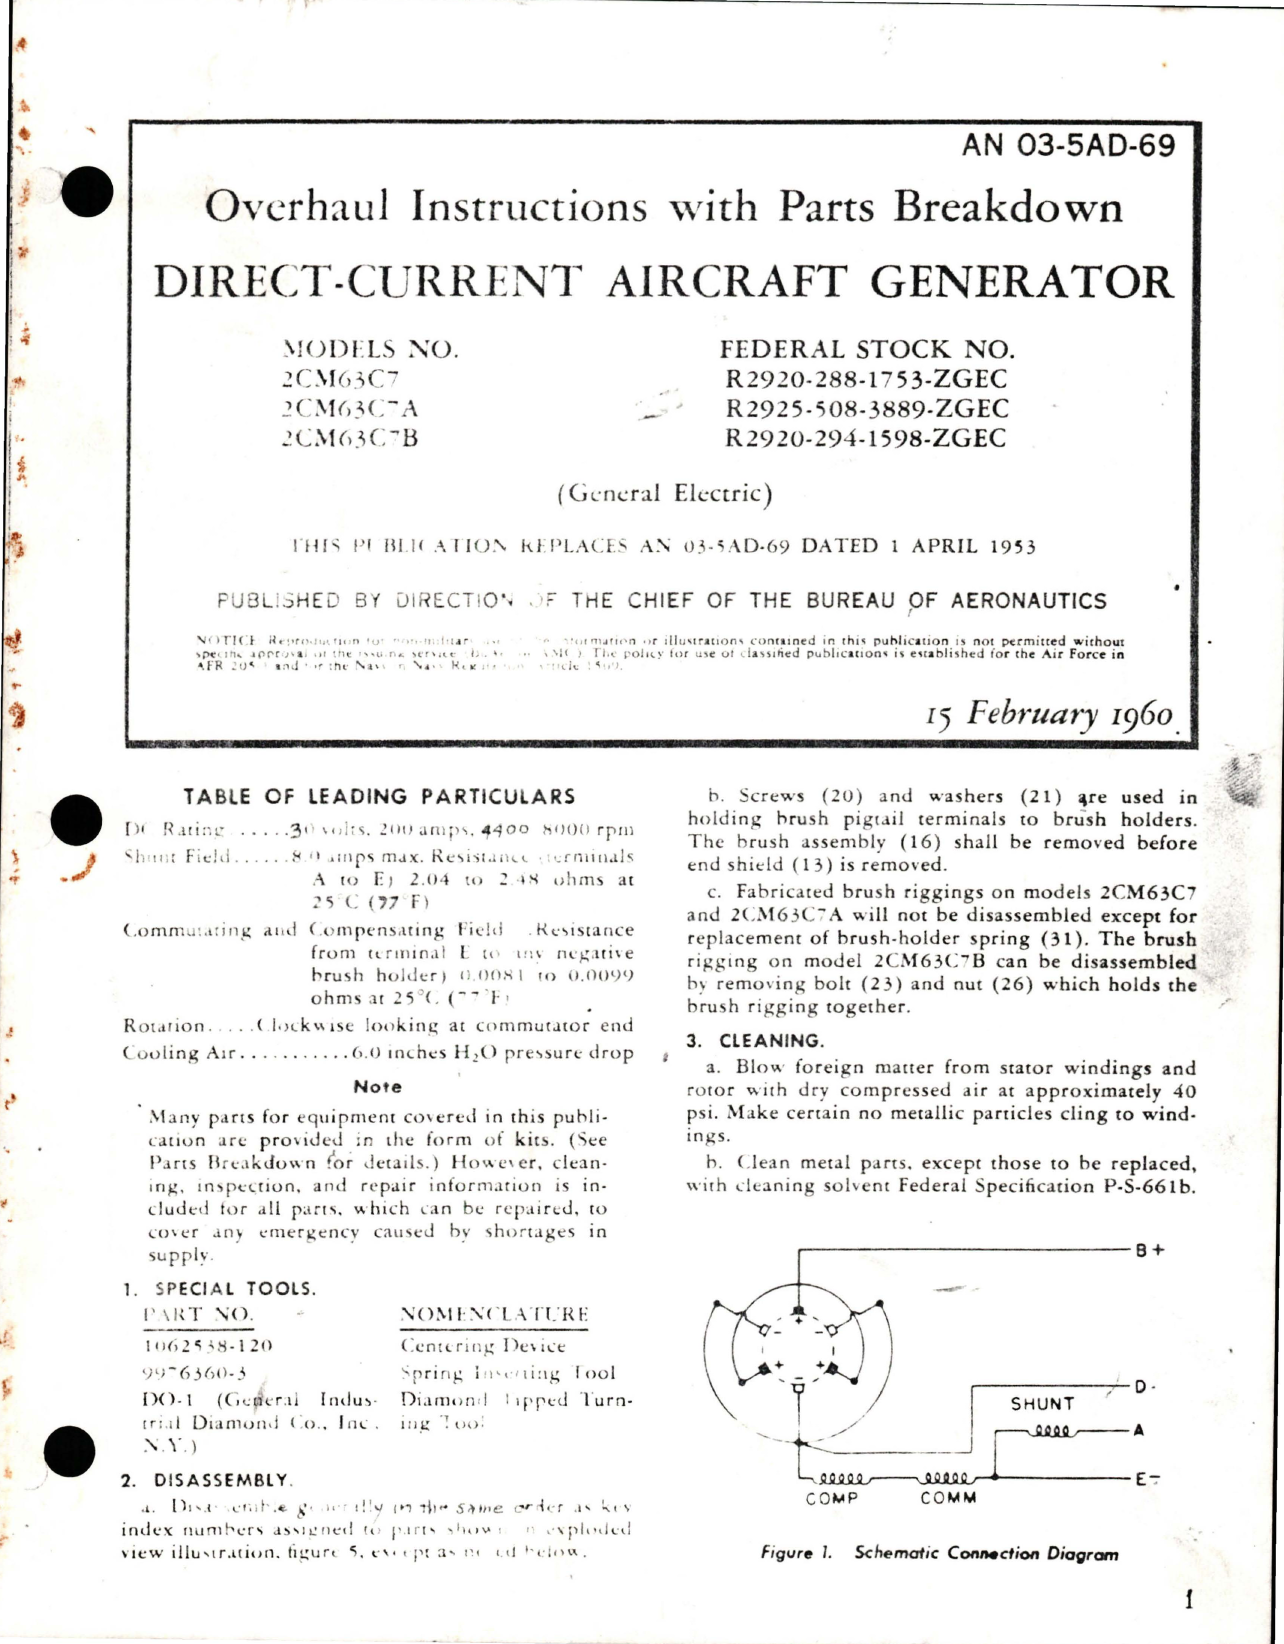 Sample page 1 from AirCorps Library document: Overhaul Instructions with Parts Breakdown for Direct Current Aircraft Generator